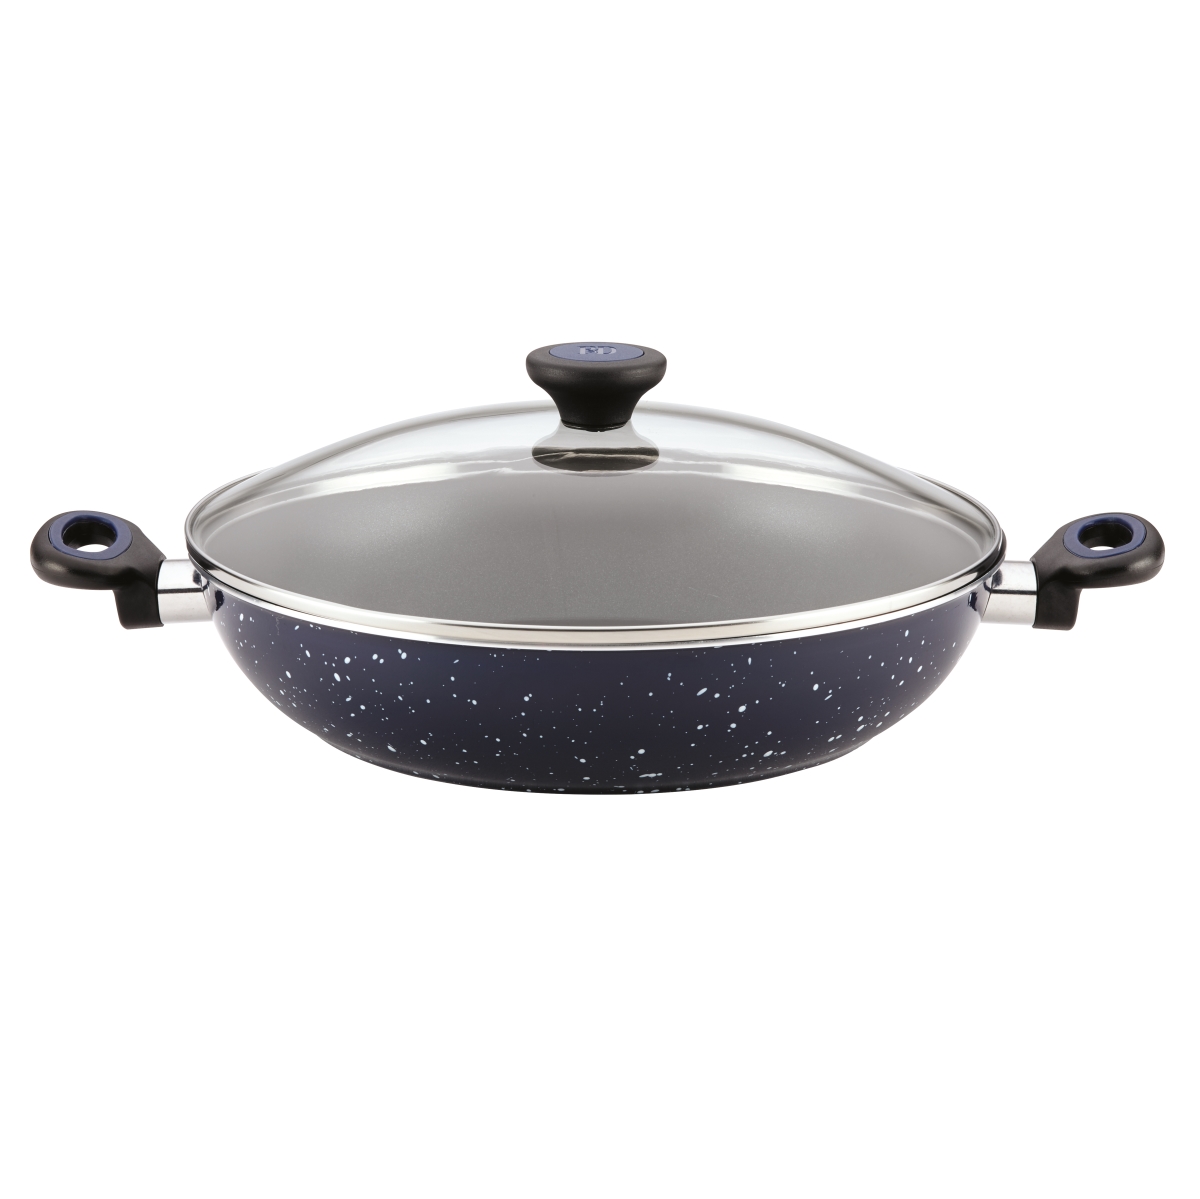 13794 12.5 In. Riverbend Aluminum Nonstick Covered Chicken Fryer With Side Handles, Deep Blue Speckle